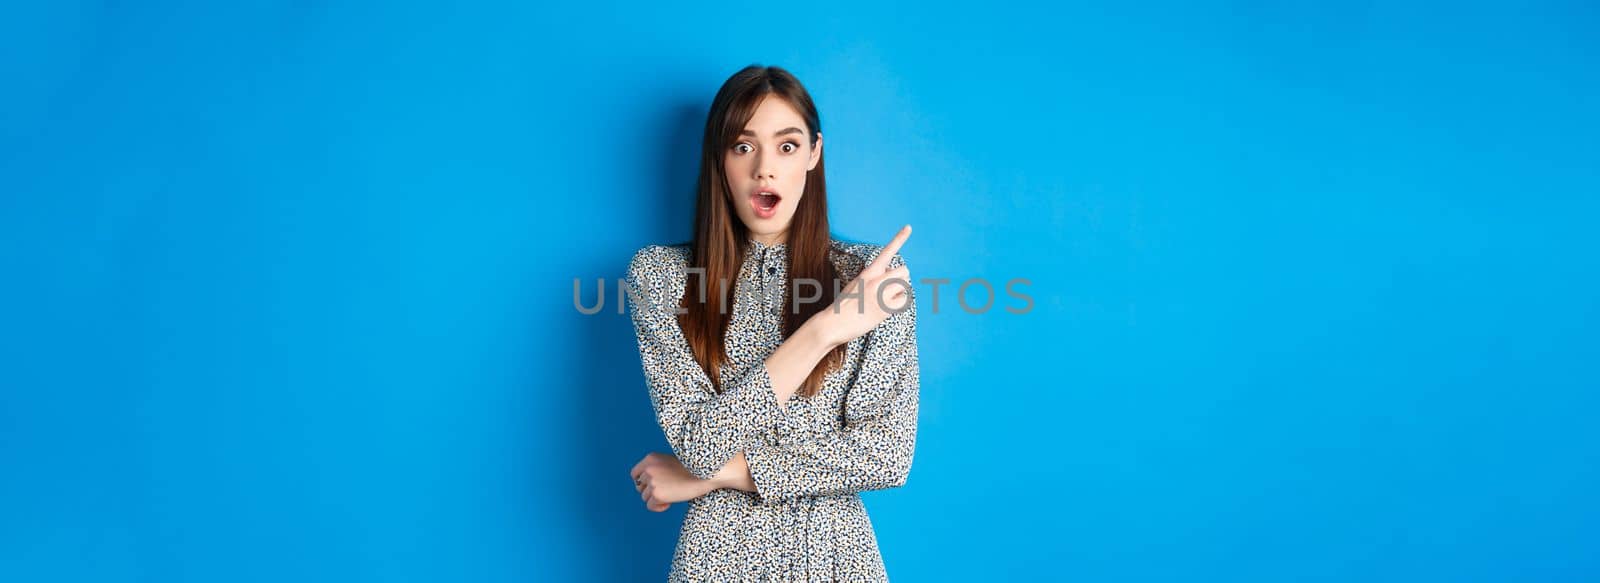 Excited pretty woman in dress pointing at upper left corner, look with disbelief and amazement, checking out cool promo, blue background.